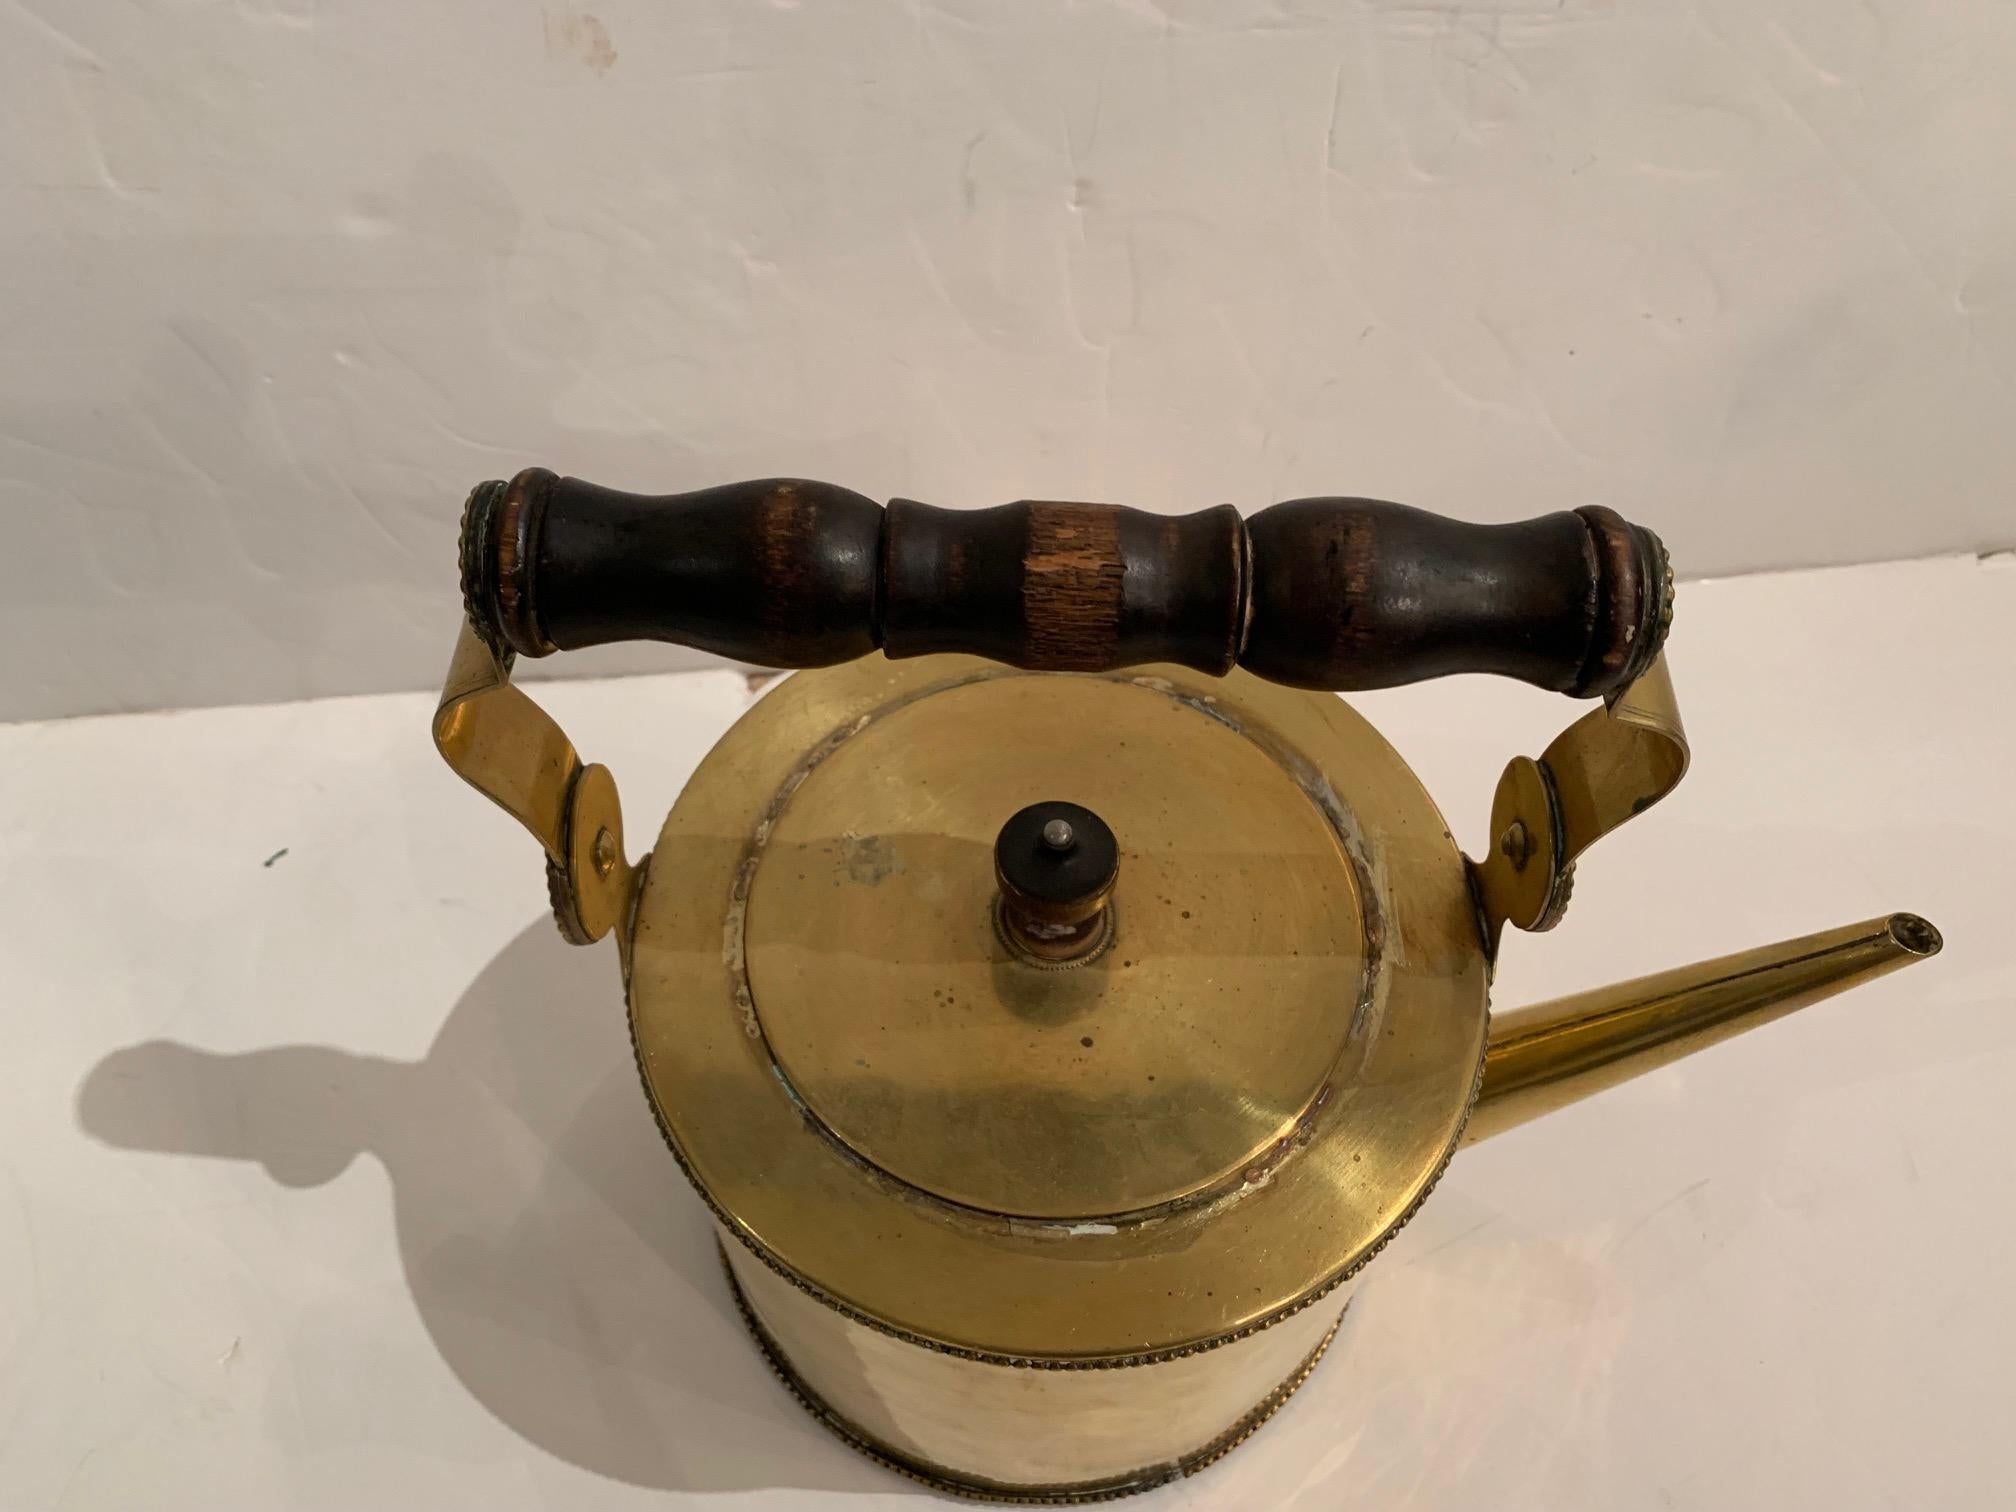 Very pretty brass antique tea kettle having beaded decoration around the periphery, elegant narrow straight spout, and big carved wood handle.